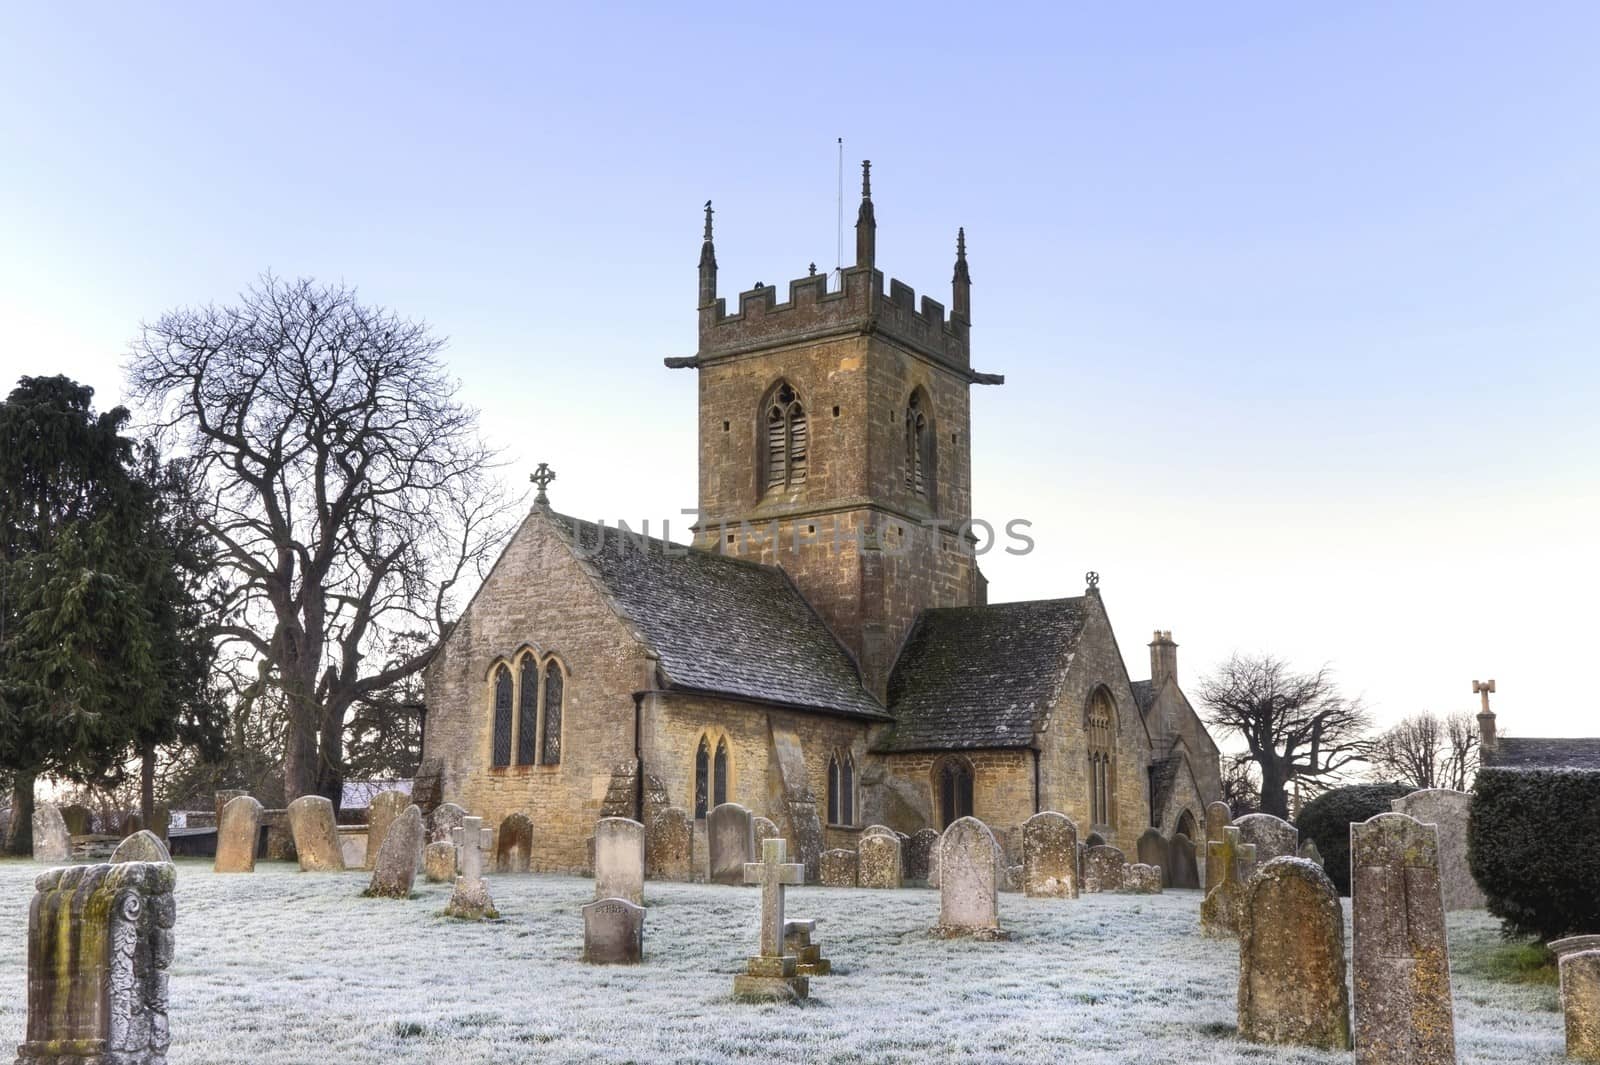 The old church at Willersey near Broadway, Gloucestershire, England.